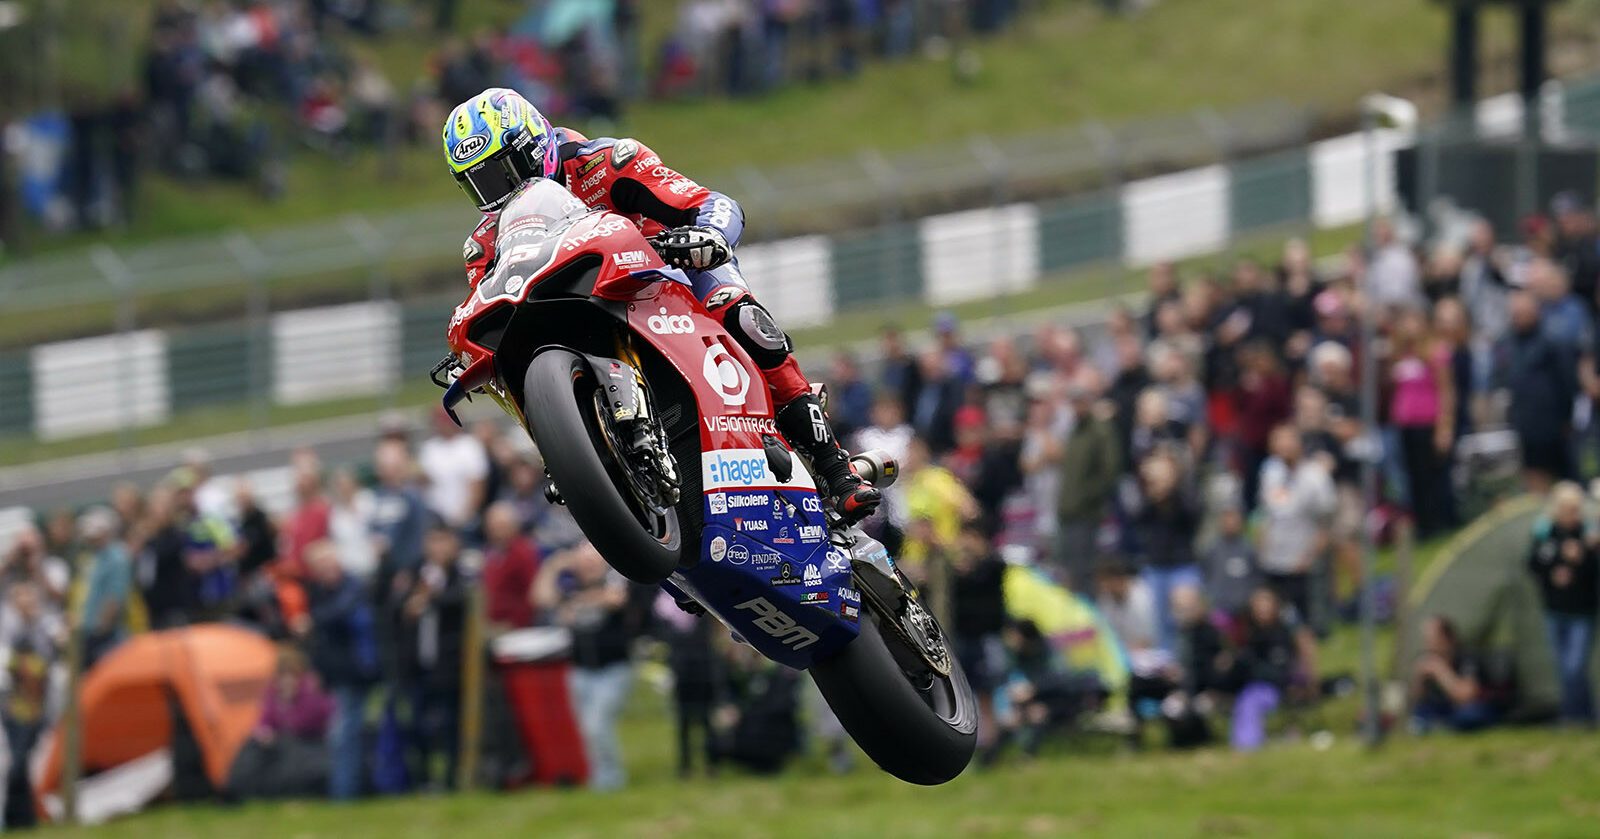 Josh Brookes (25) is currently outside the Showdown positions (top eight in the Championship), but the veteran will be looking to jump up the standings this Bank Holiday weekend at Cadwell Park. Photo courtesy MSVR.